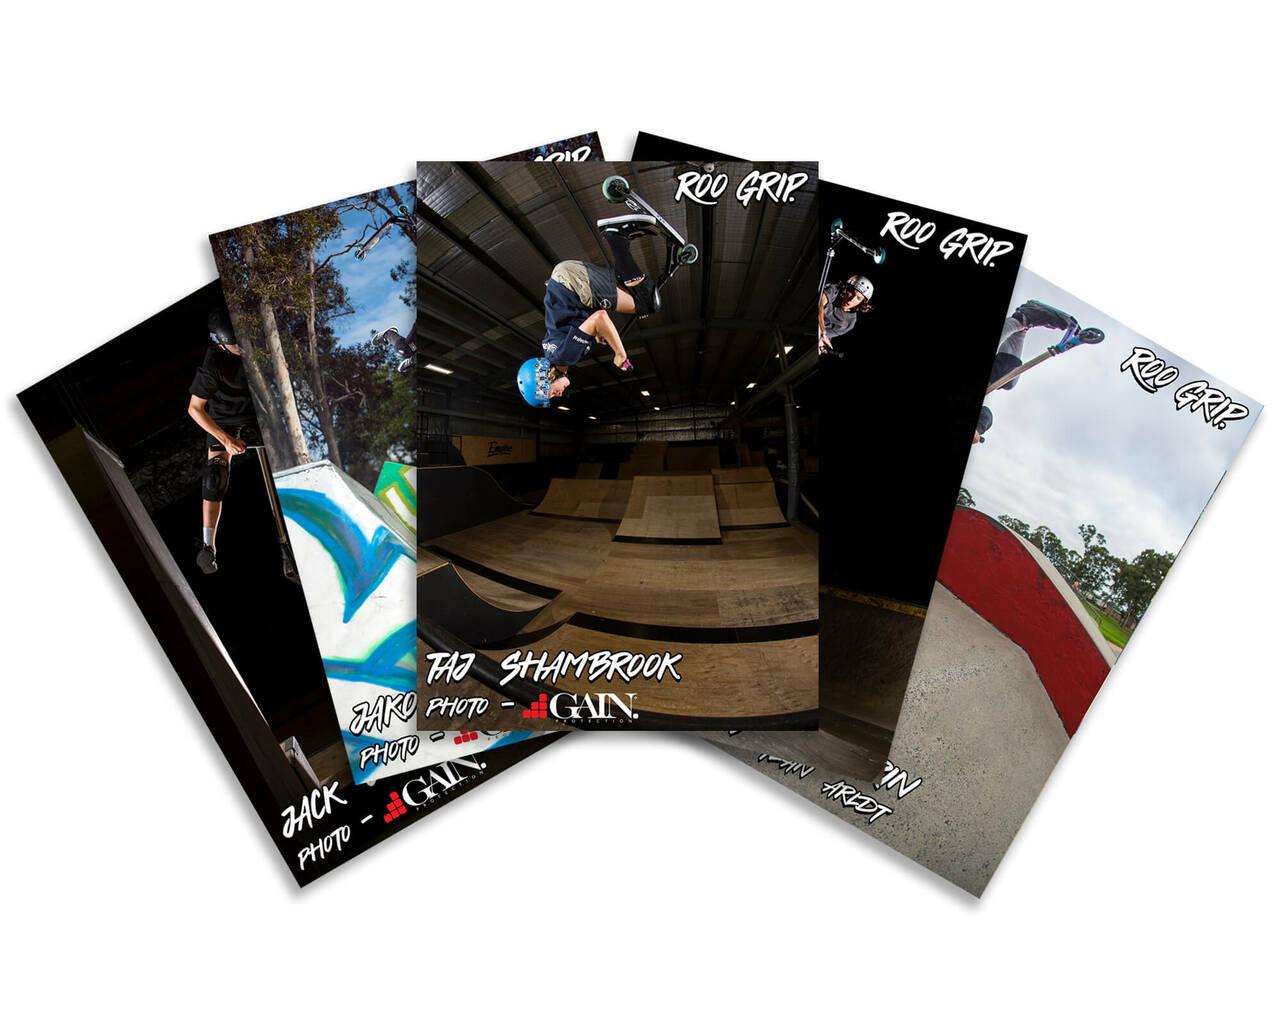 Roo Grip Team Poster Pack